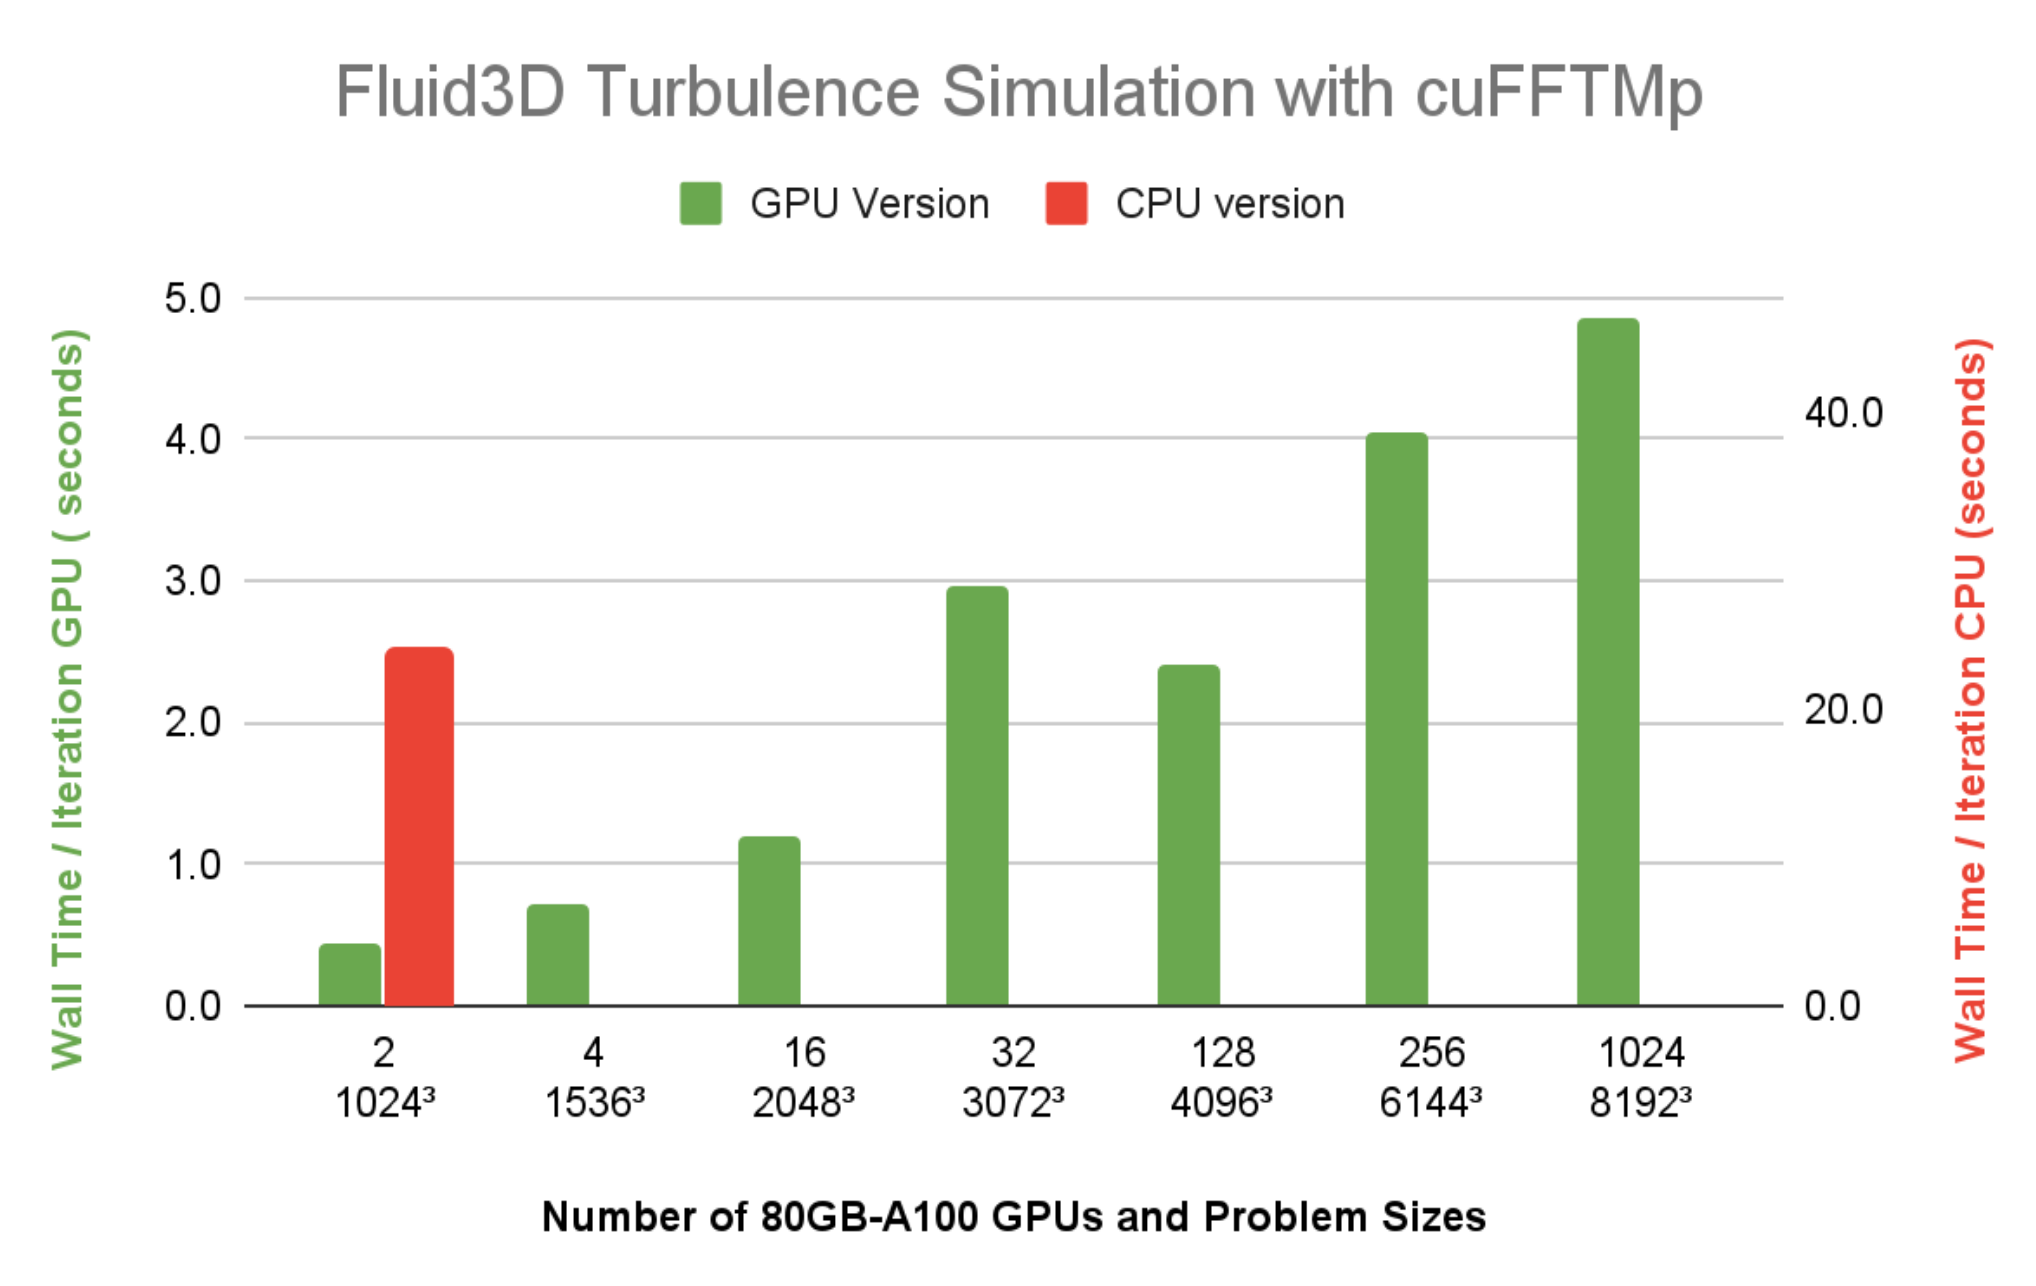 The left y-axis provides wall time for GPU execution (green) and the right y-axis represents wall time for CPU execution (red). Due to the long execution time, only 10243 was run for CPU results.